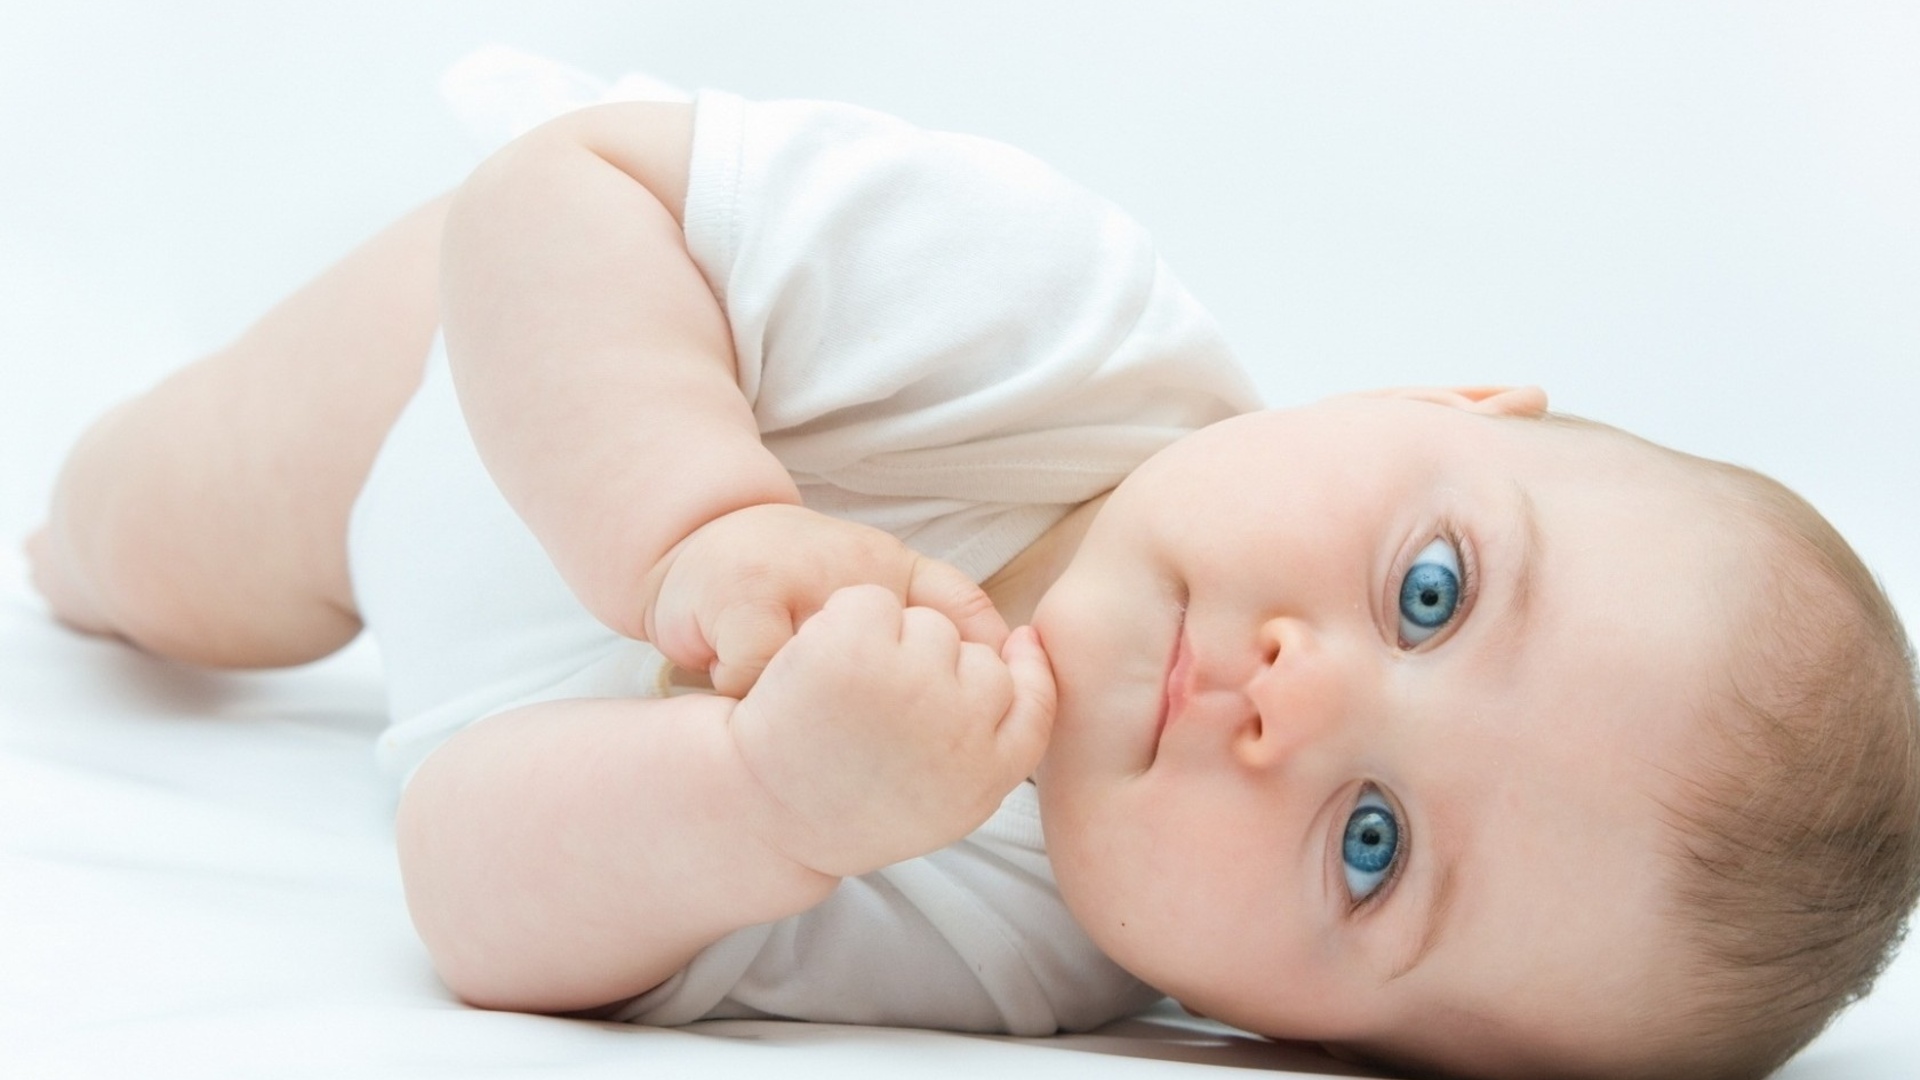 Baby Full HD Wallpaper and Background Image | 1920x1080 ...